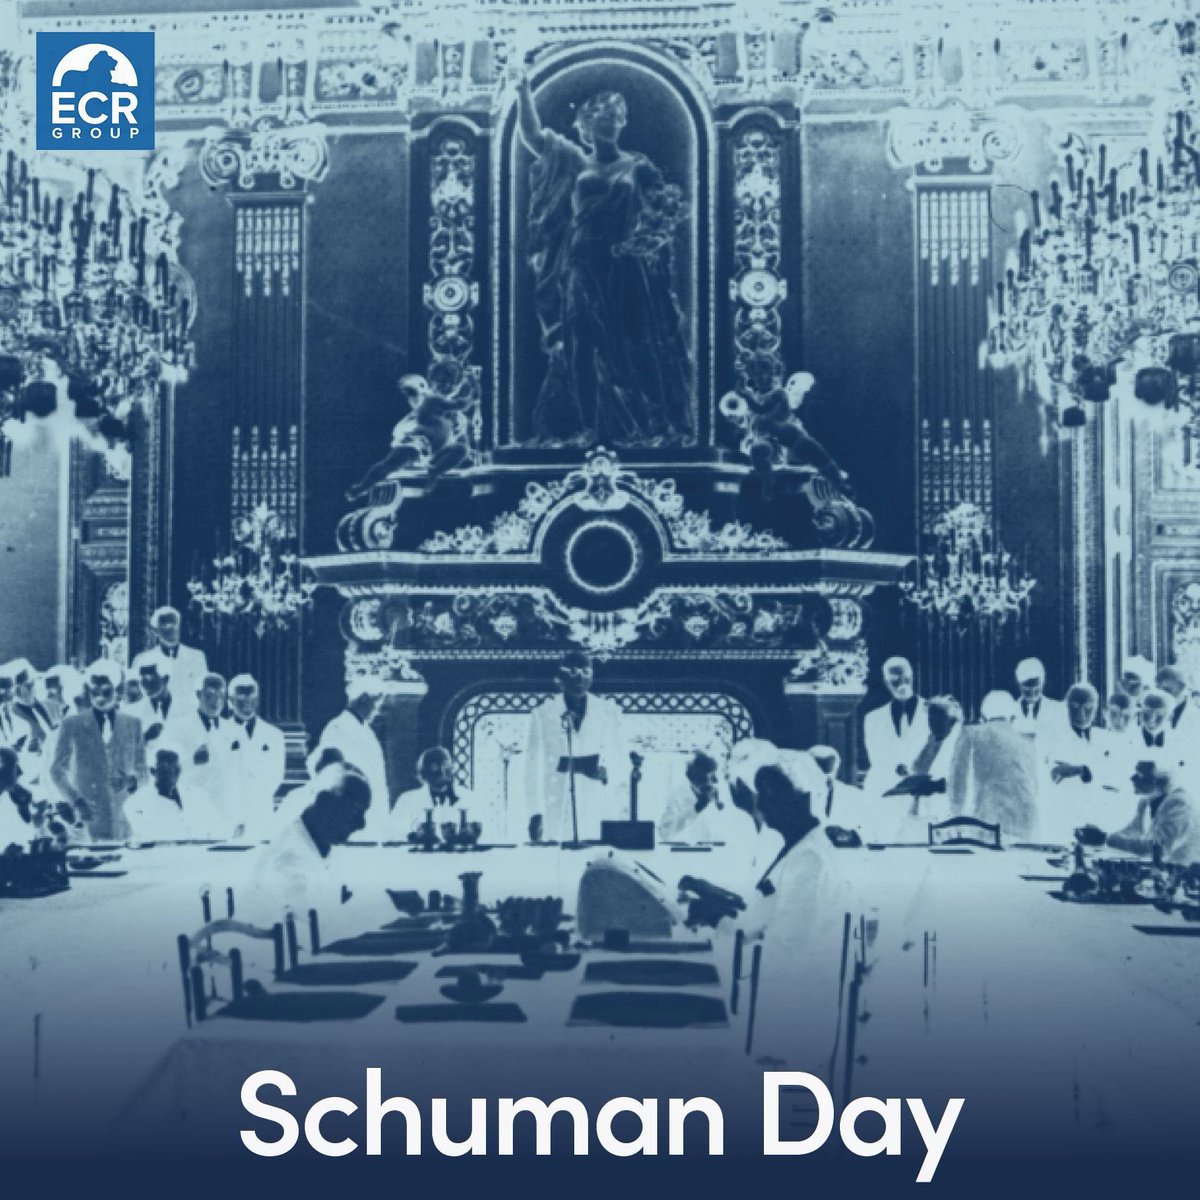 On this day in 1950, the Schuman Declaration set the stage for a new chapter in European cooperation. The EU was meant to provide for collaboration, whereby nations could work together for mutual benefit. But as power increasingly shifts to Brussels, the Union risks losing…